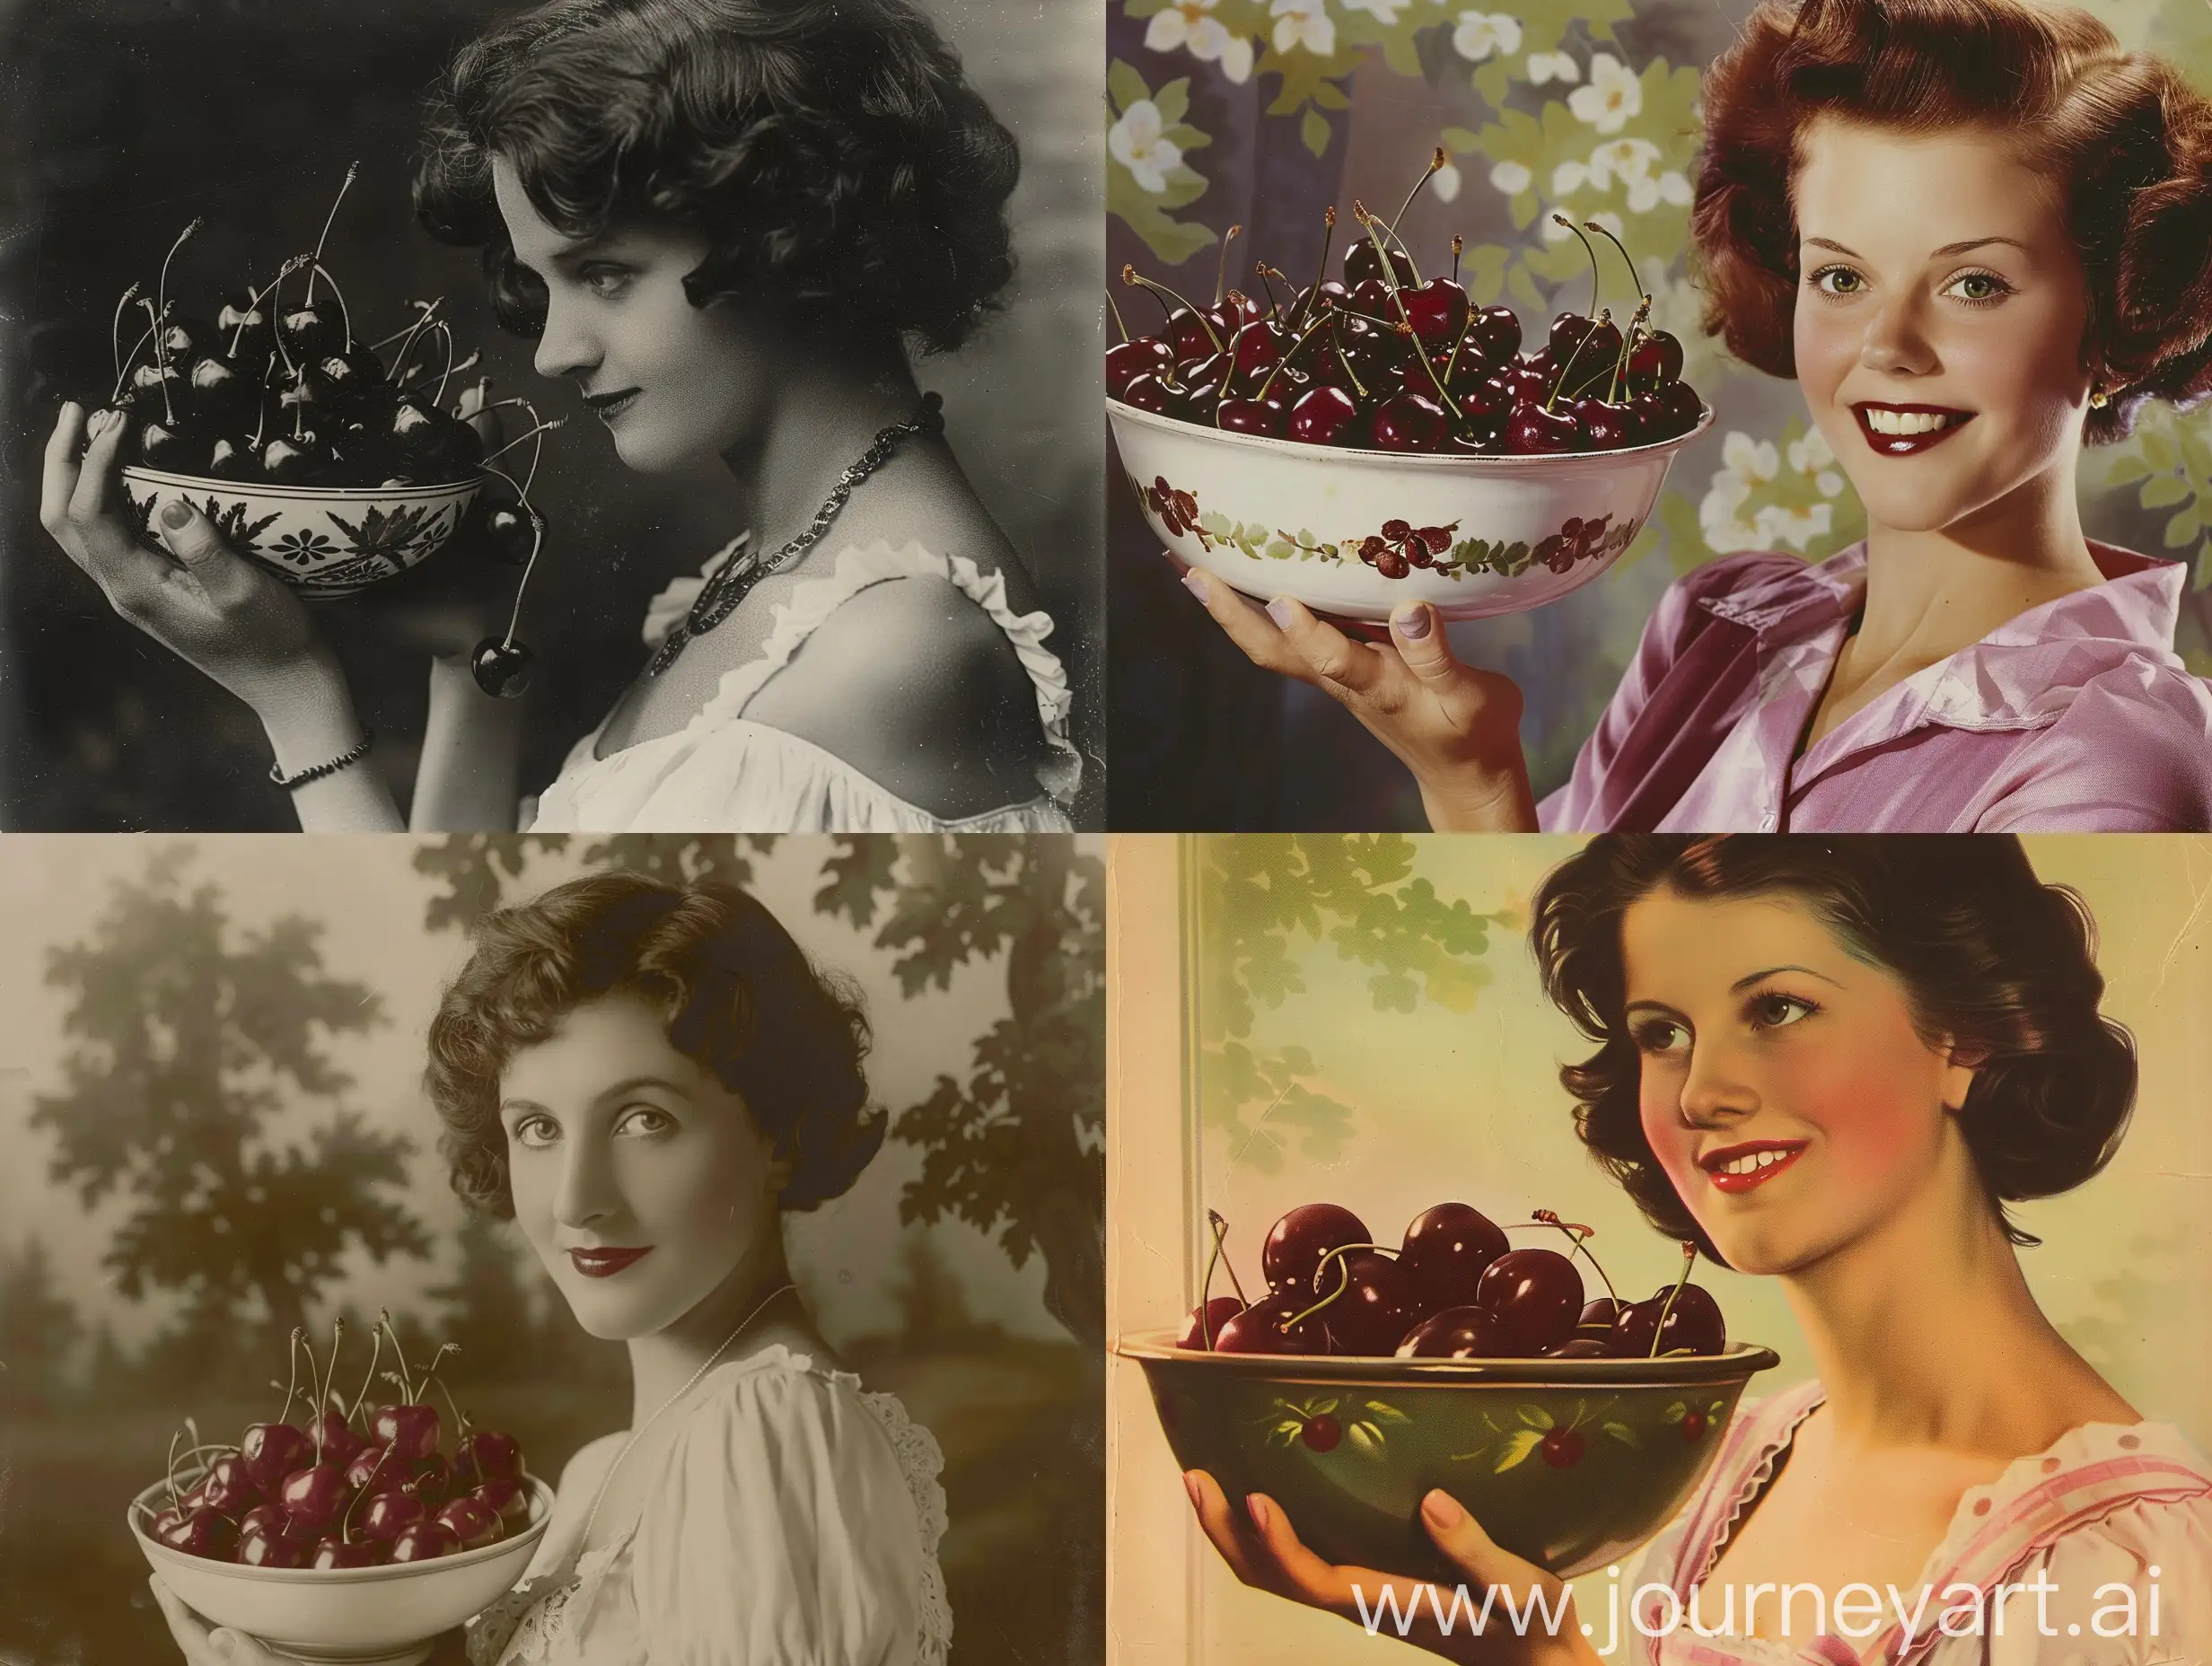 Elegant-Woman-Holding-a-Bowl-of-Fresh-Cherries-for-Advertisement